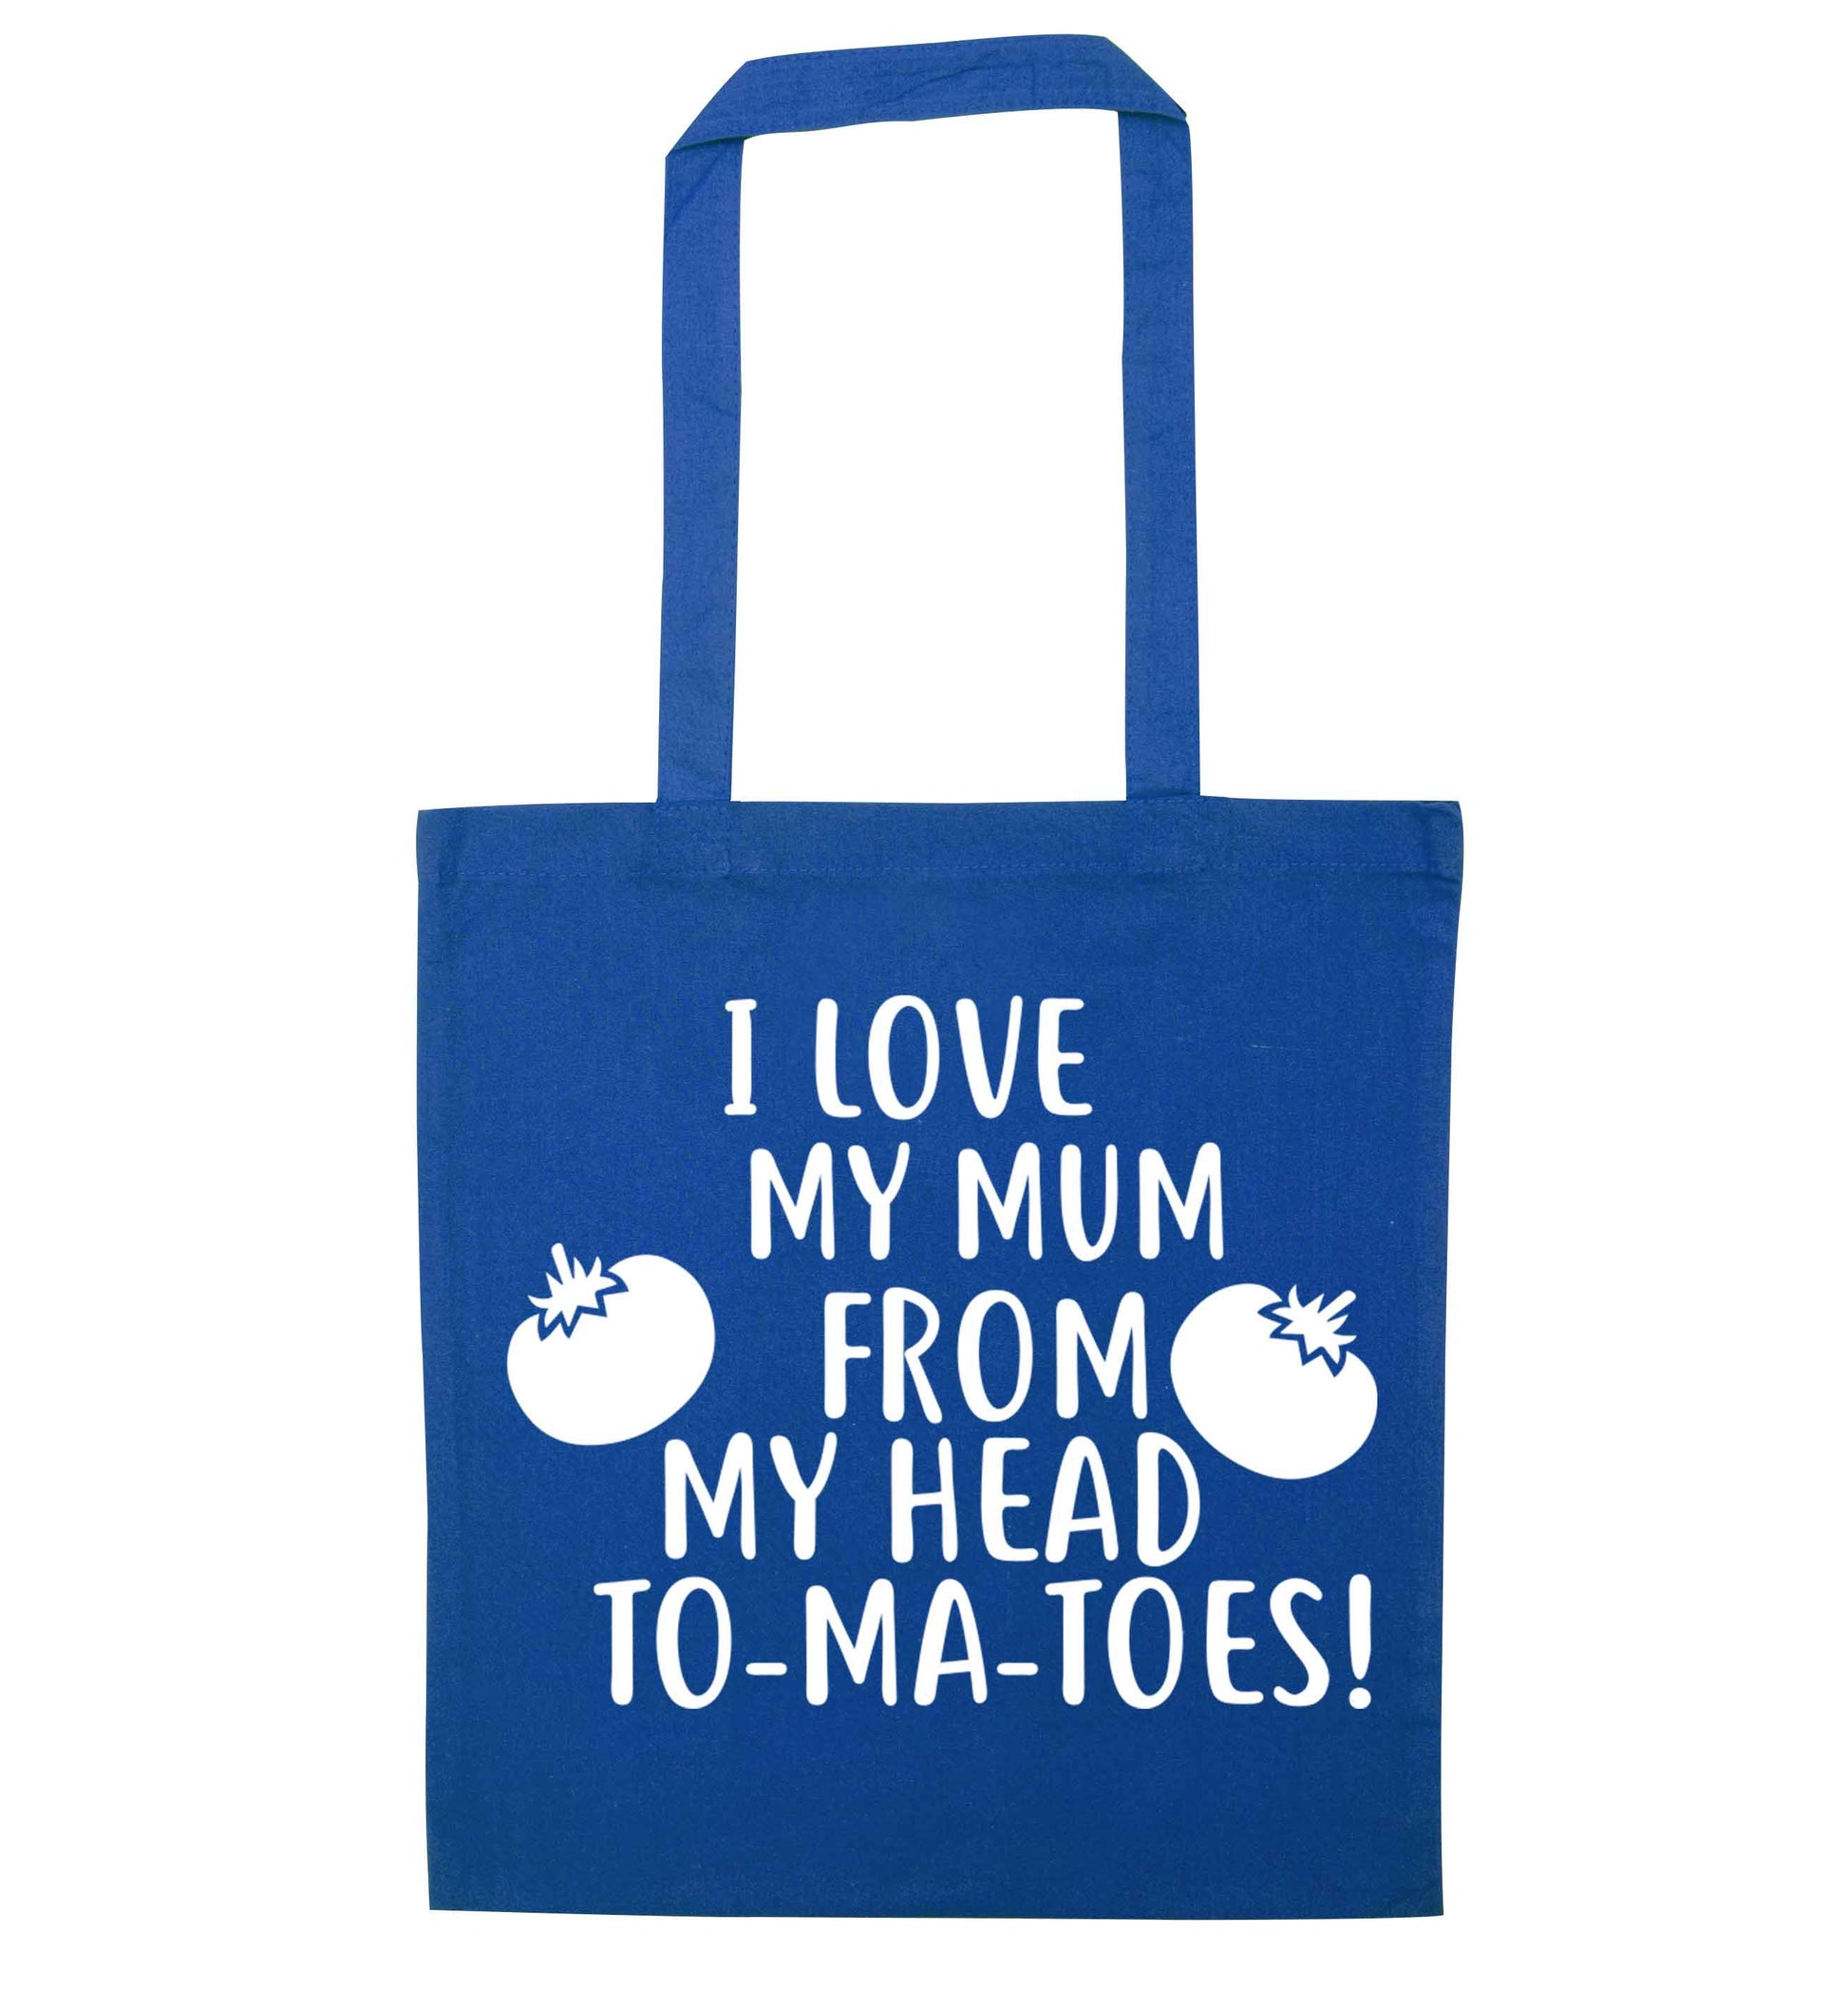 I love my mum from my head to-my-toes! blue tote bag